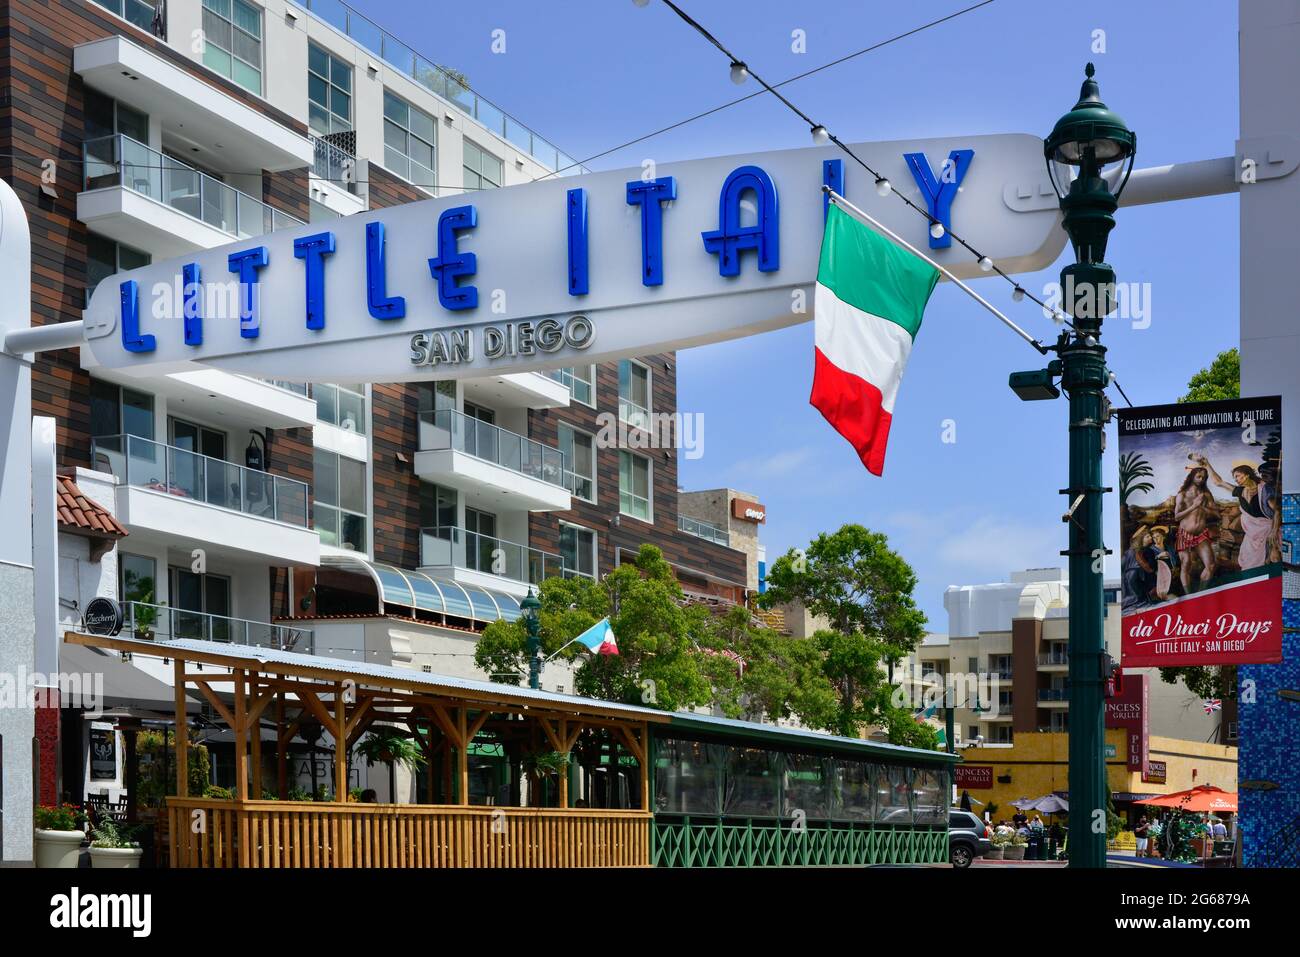 The 'Little Italy' landmark overhead sign for the historically Italian neighborhood, now full of upscale condos and trendy eateries, San Diego, CA Stock Photo